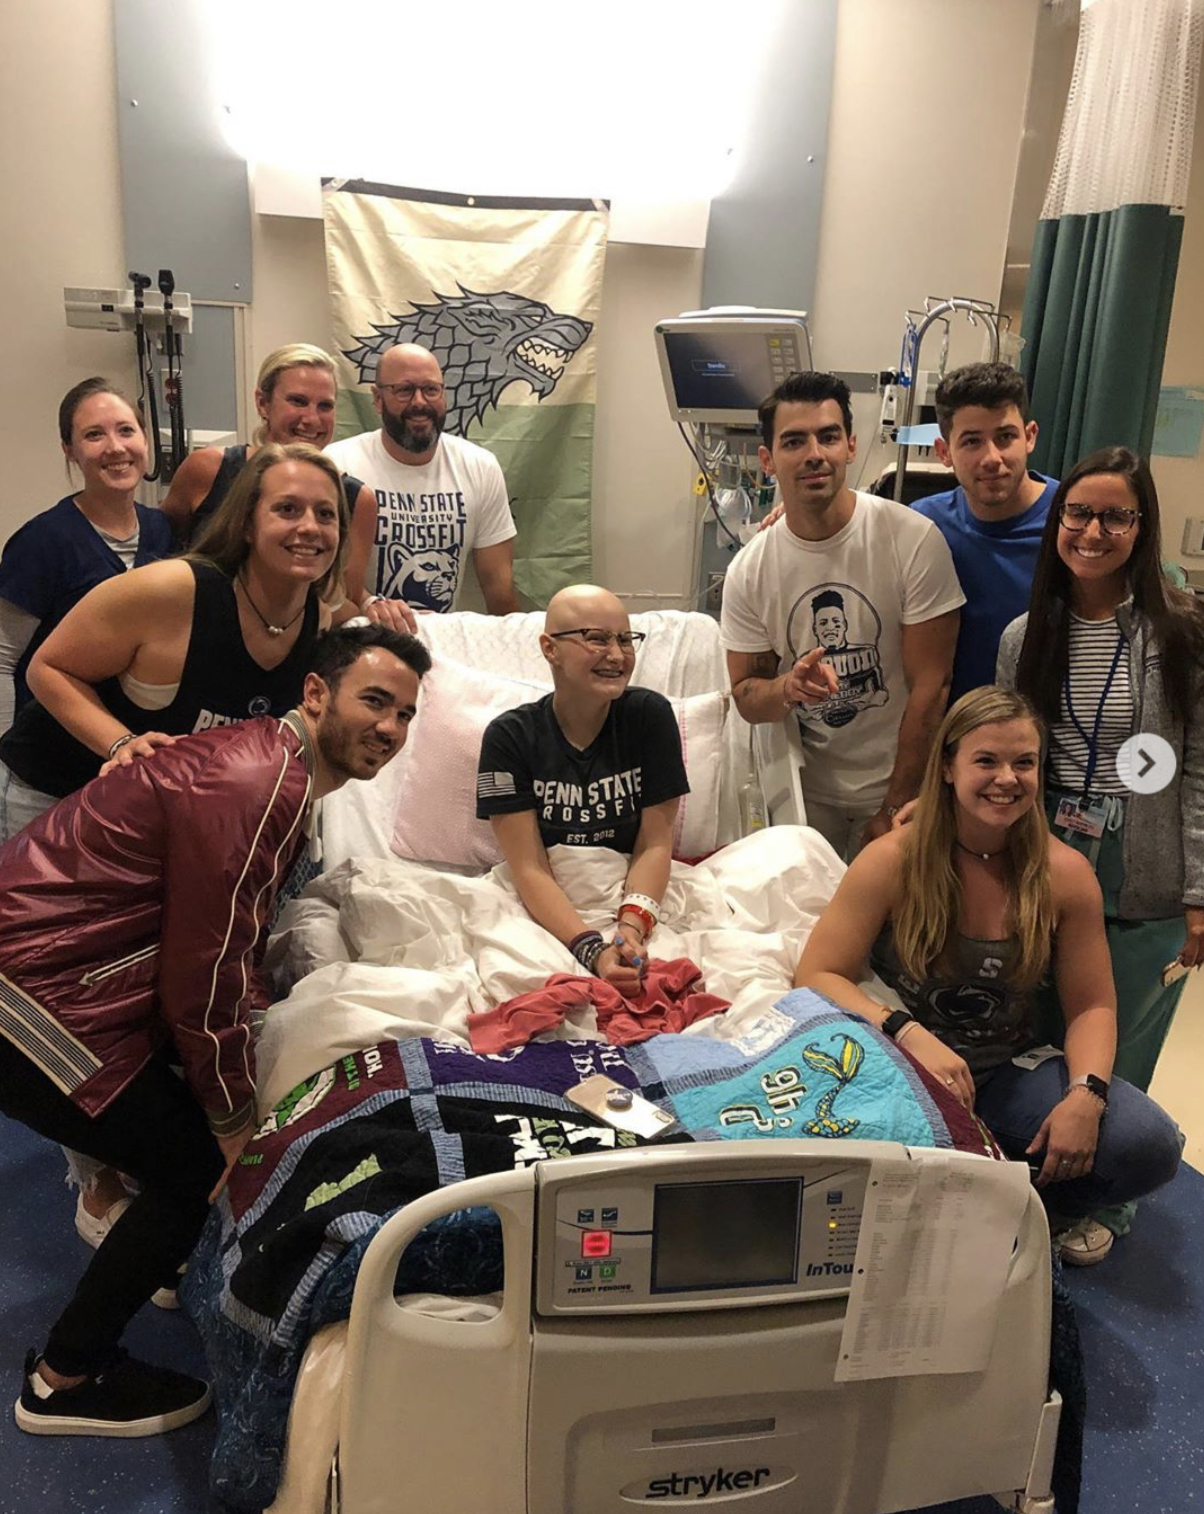 “YOU made my crappy chemo session into something incredibly special and unforgettable. Literally made my life.”